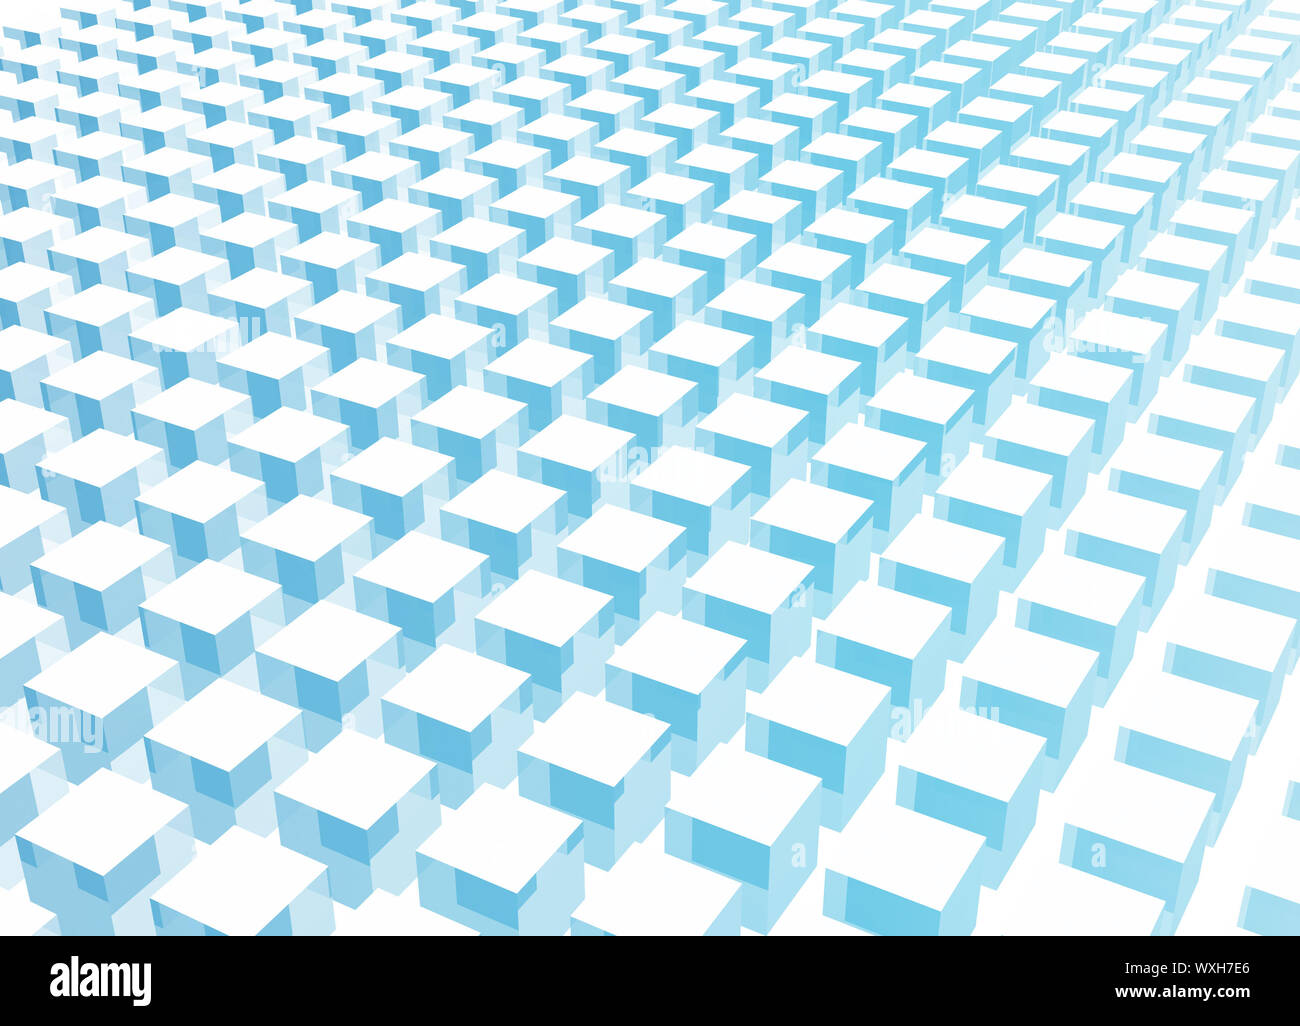 Simple and Clean Block 3d Abstract Background Stock Photo